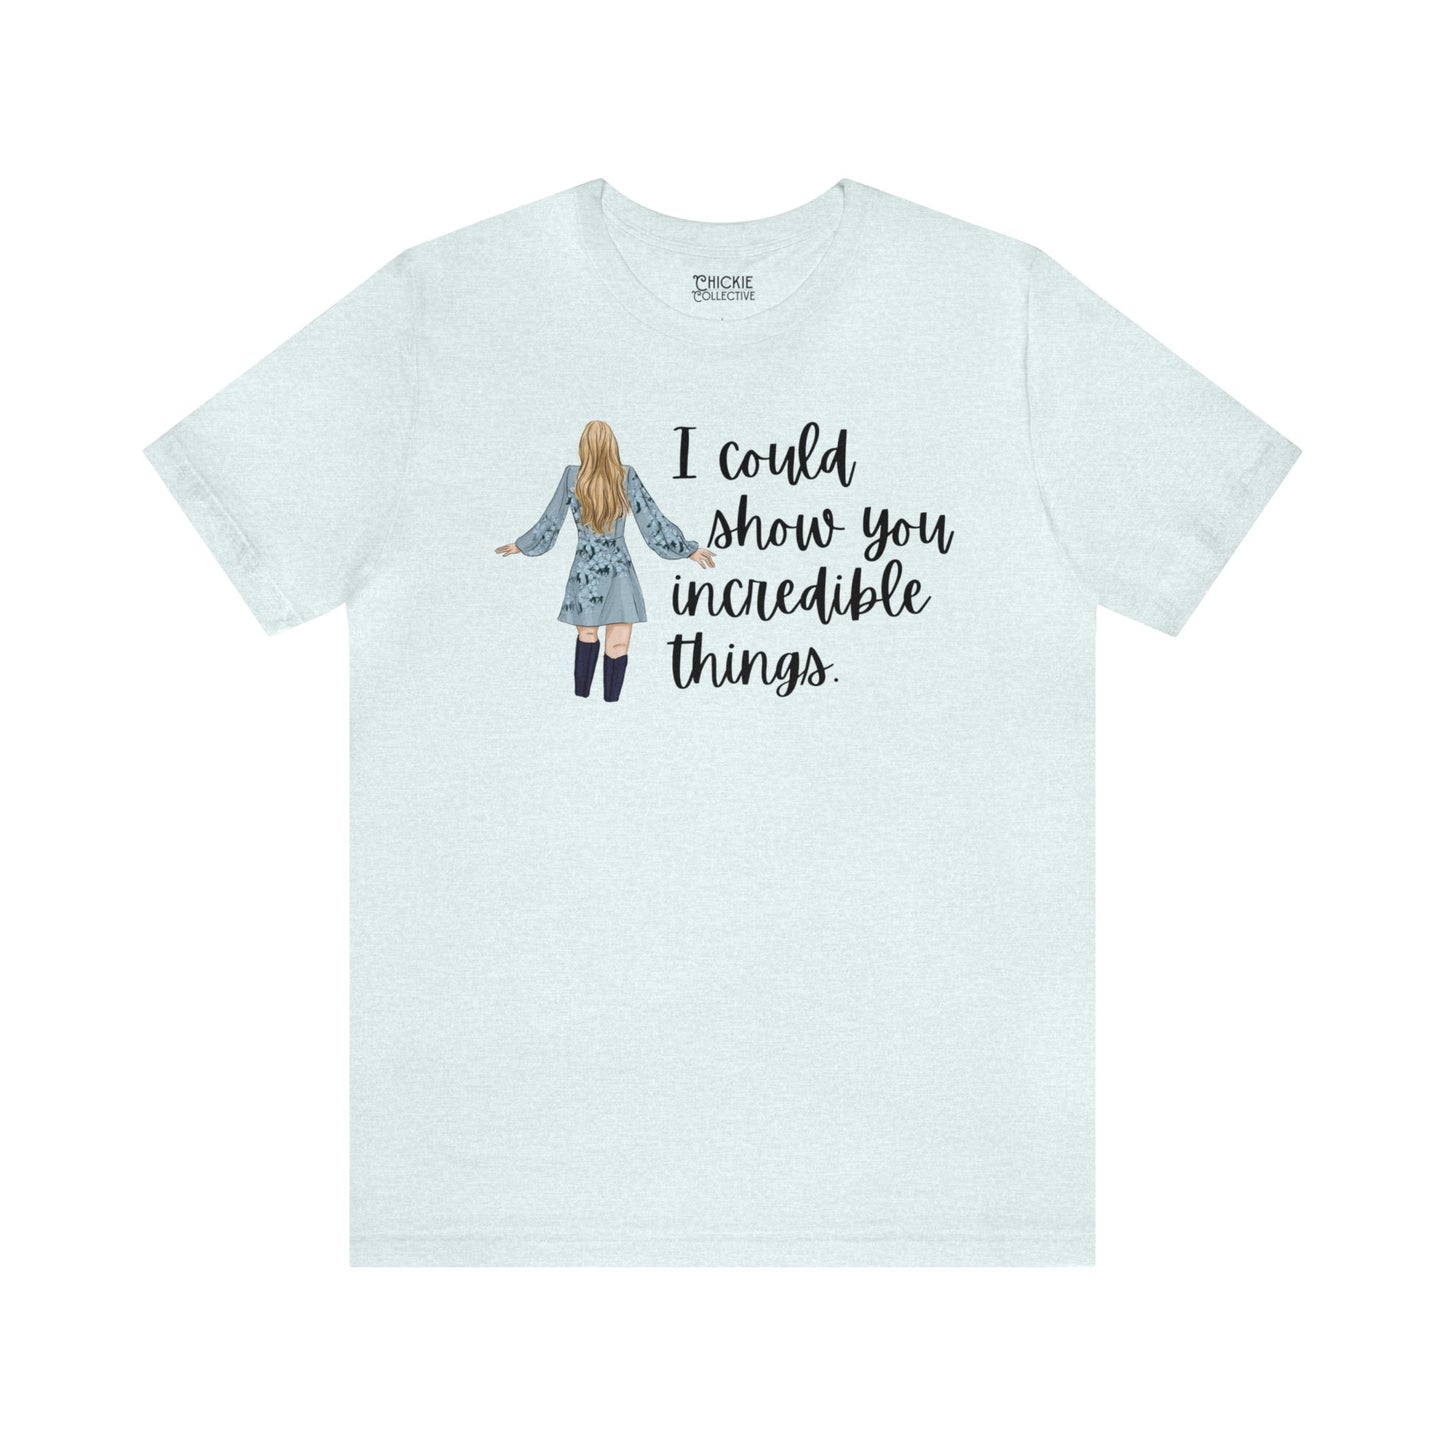 Taylor Swift Preppy Picture T-Shirt - I Could Show You Incredible Things